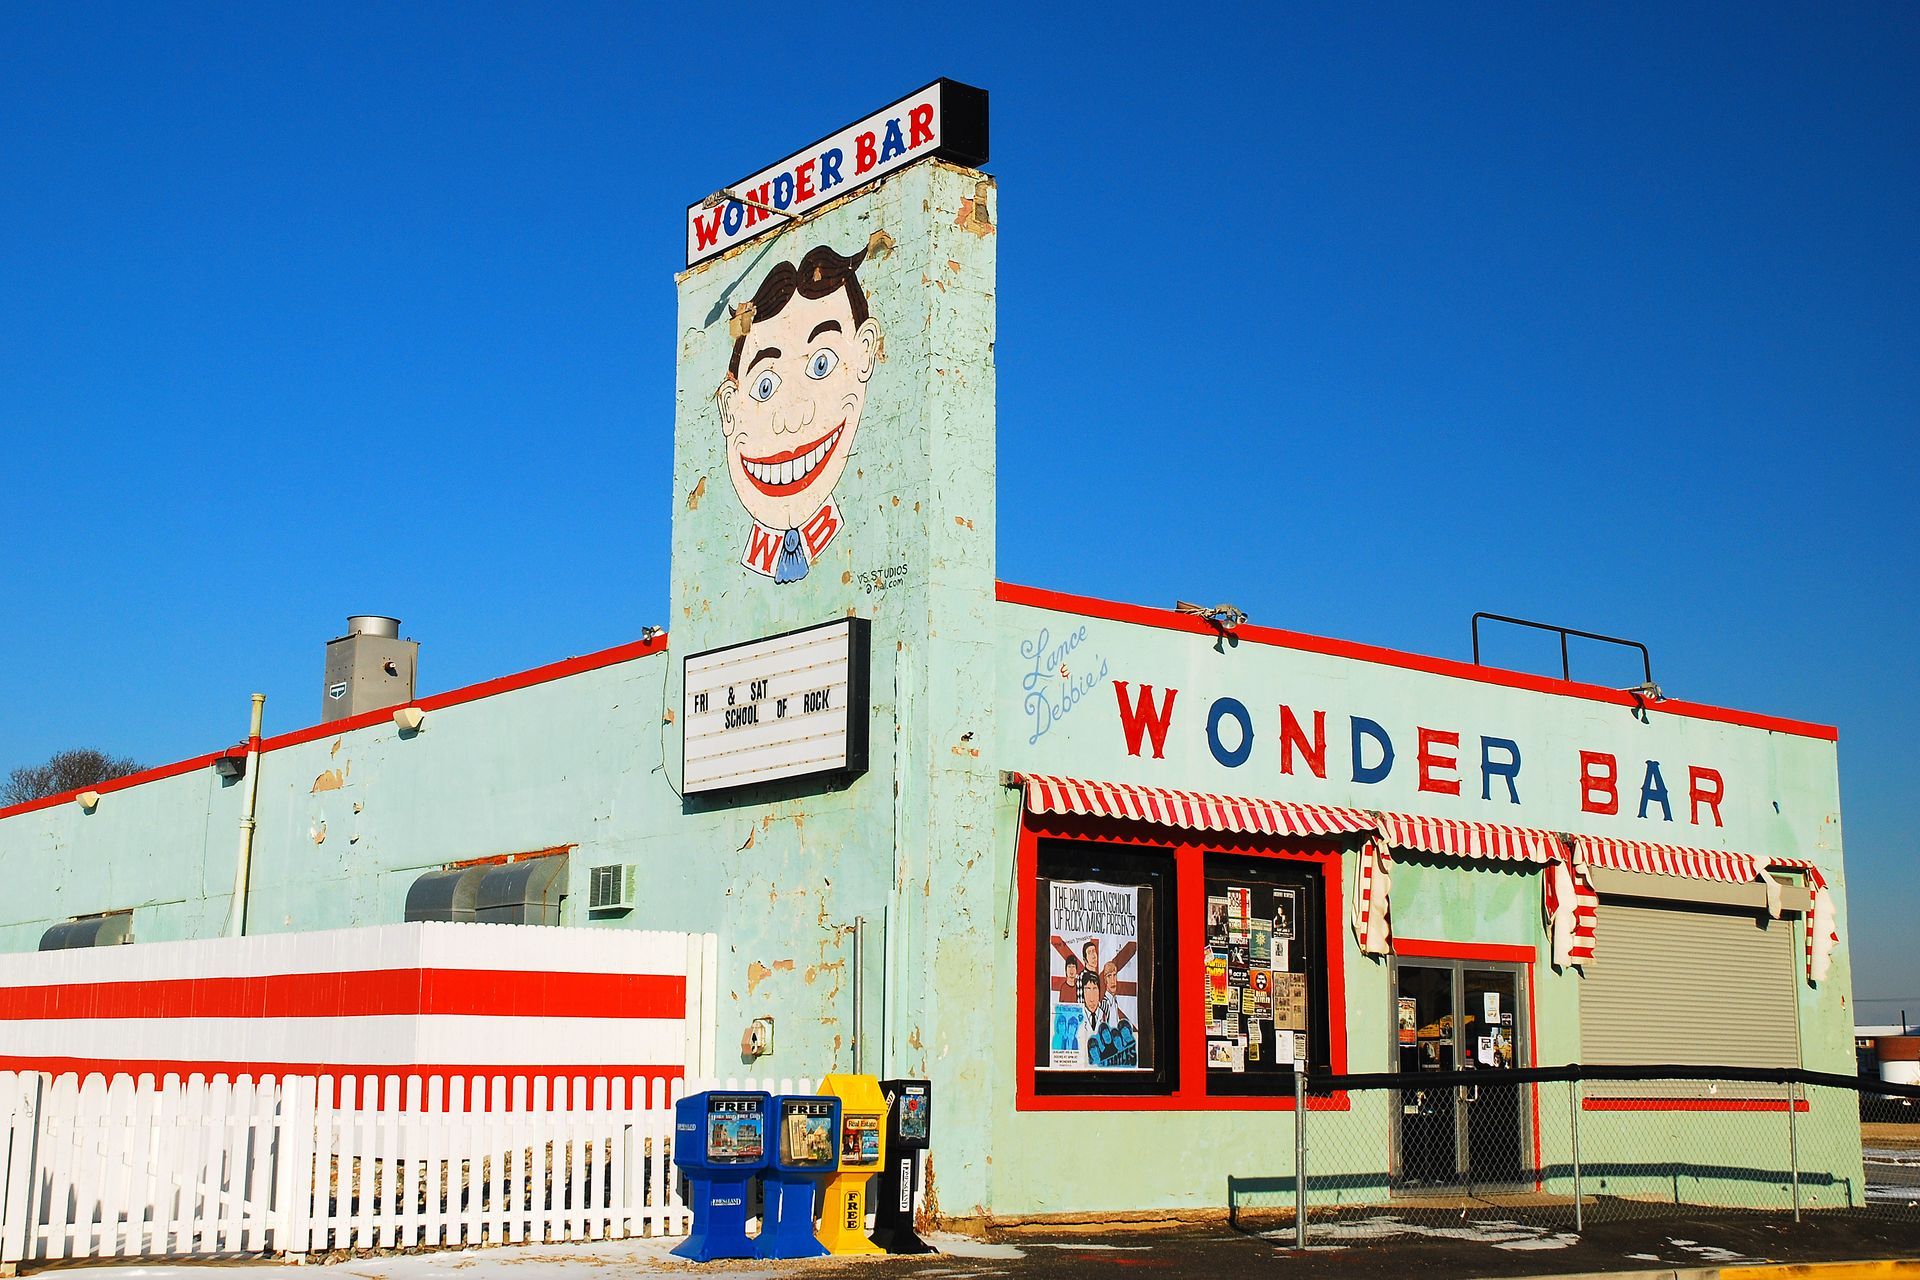 A green building with a sign that says wonder bar